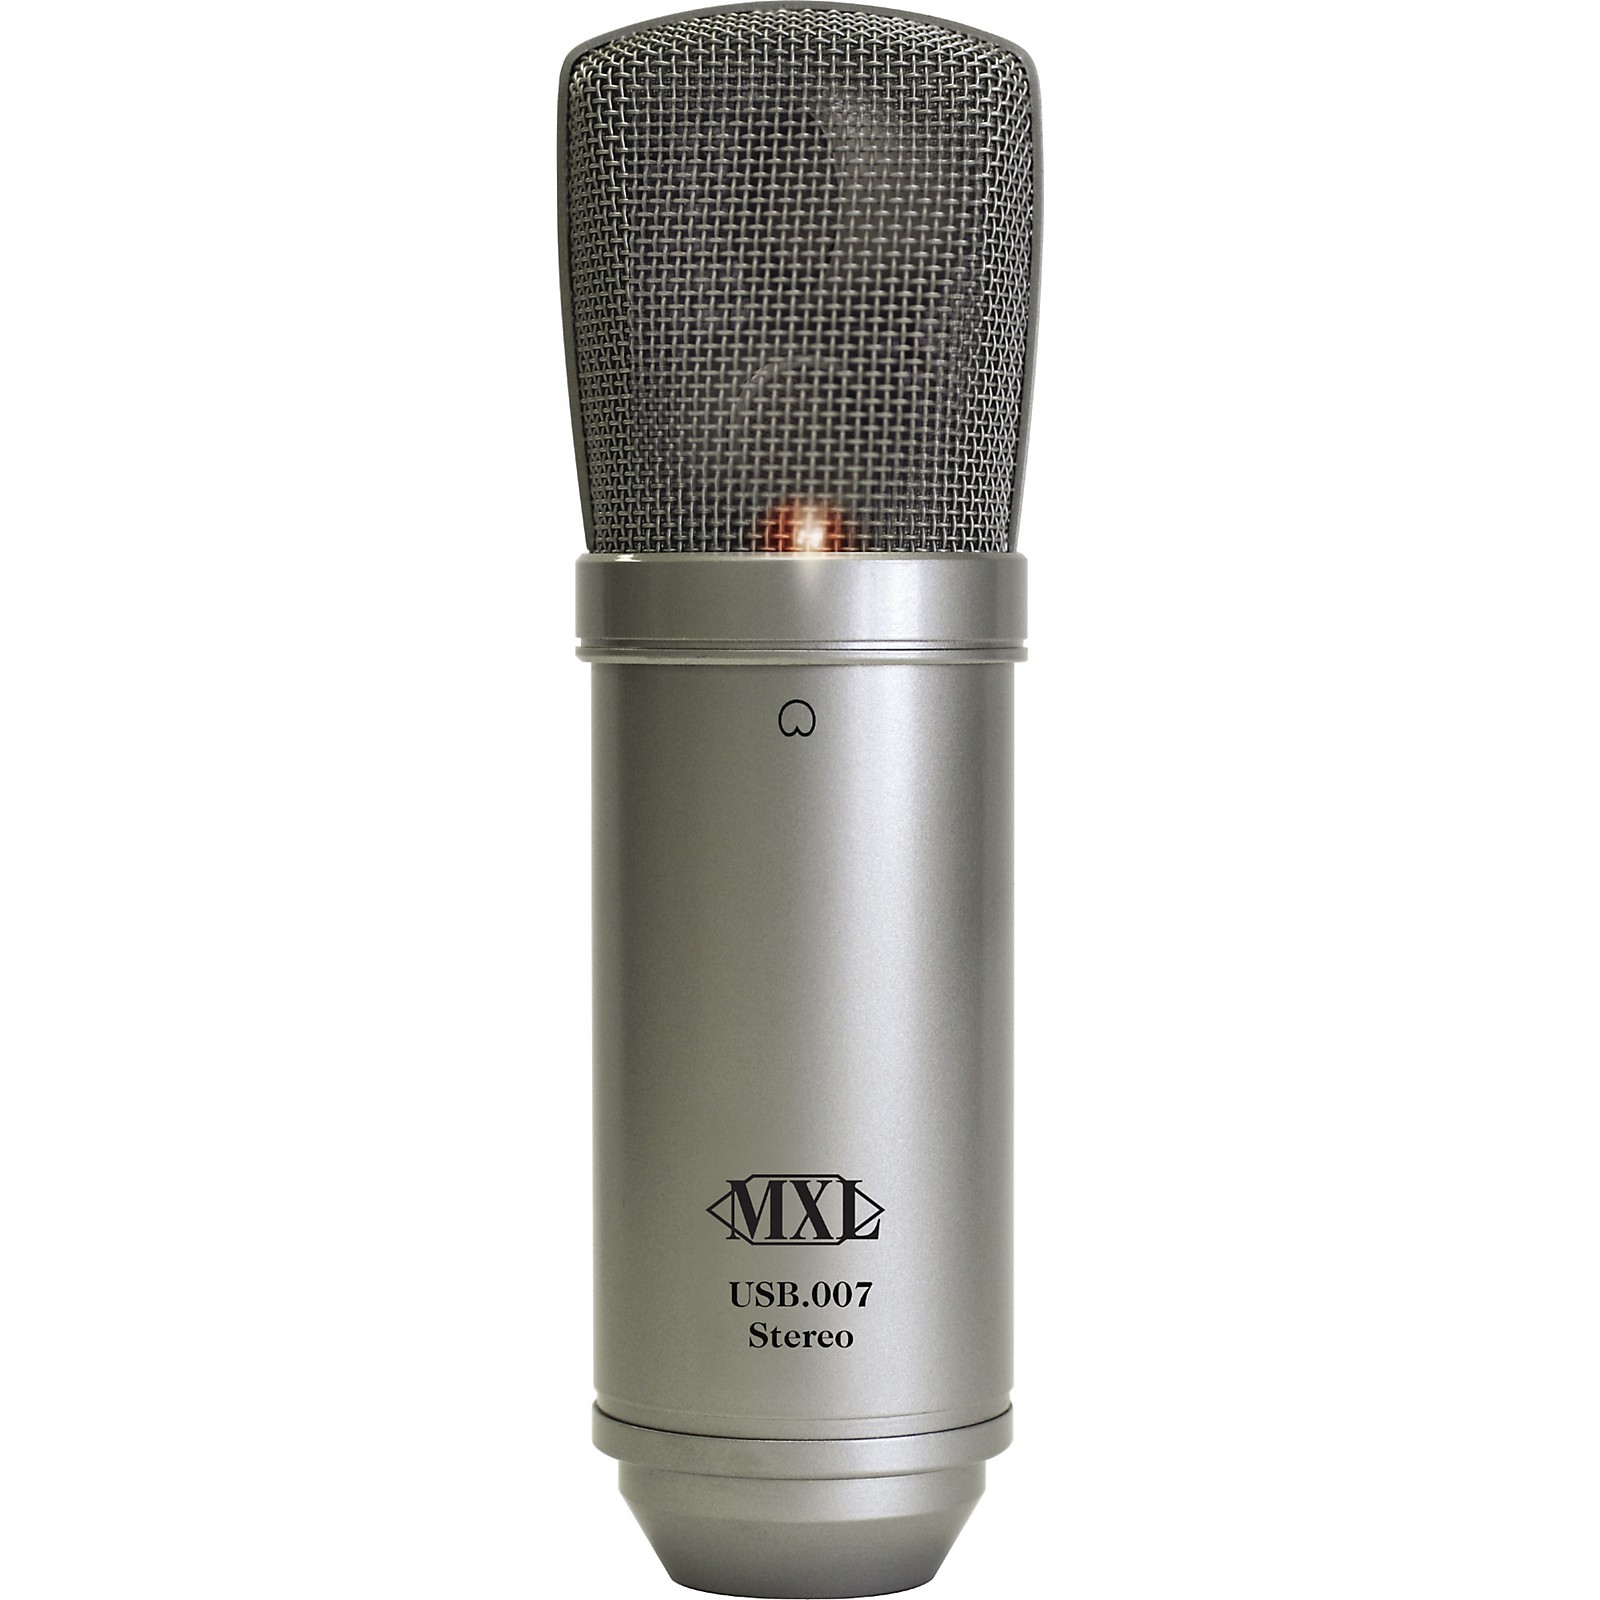 Microphone/マイク/マイクロフォン/　Diaphragm　USB.007　Condenser　Large　MXL　Stereo　Gold　Microphone-